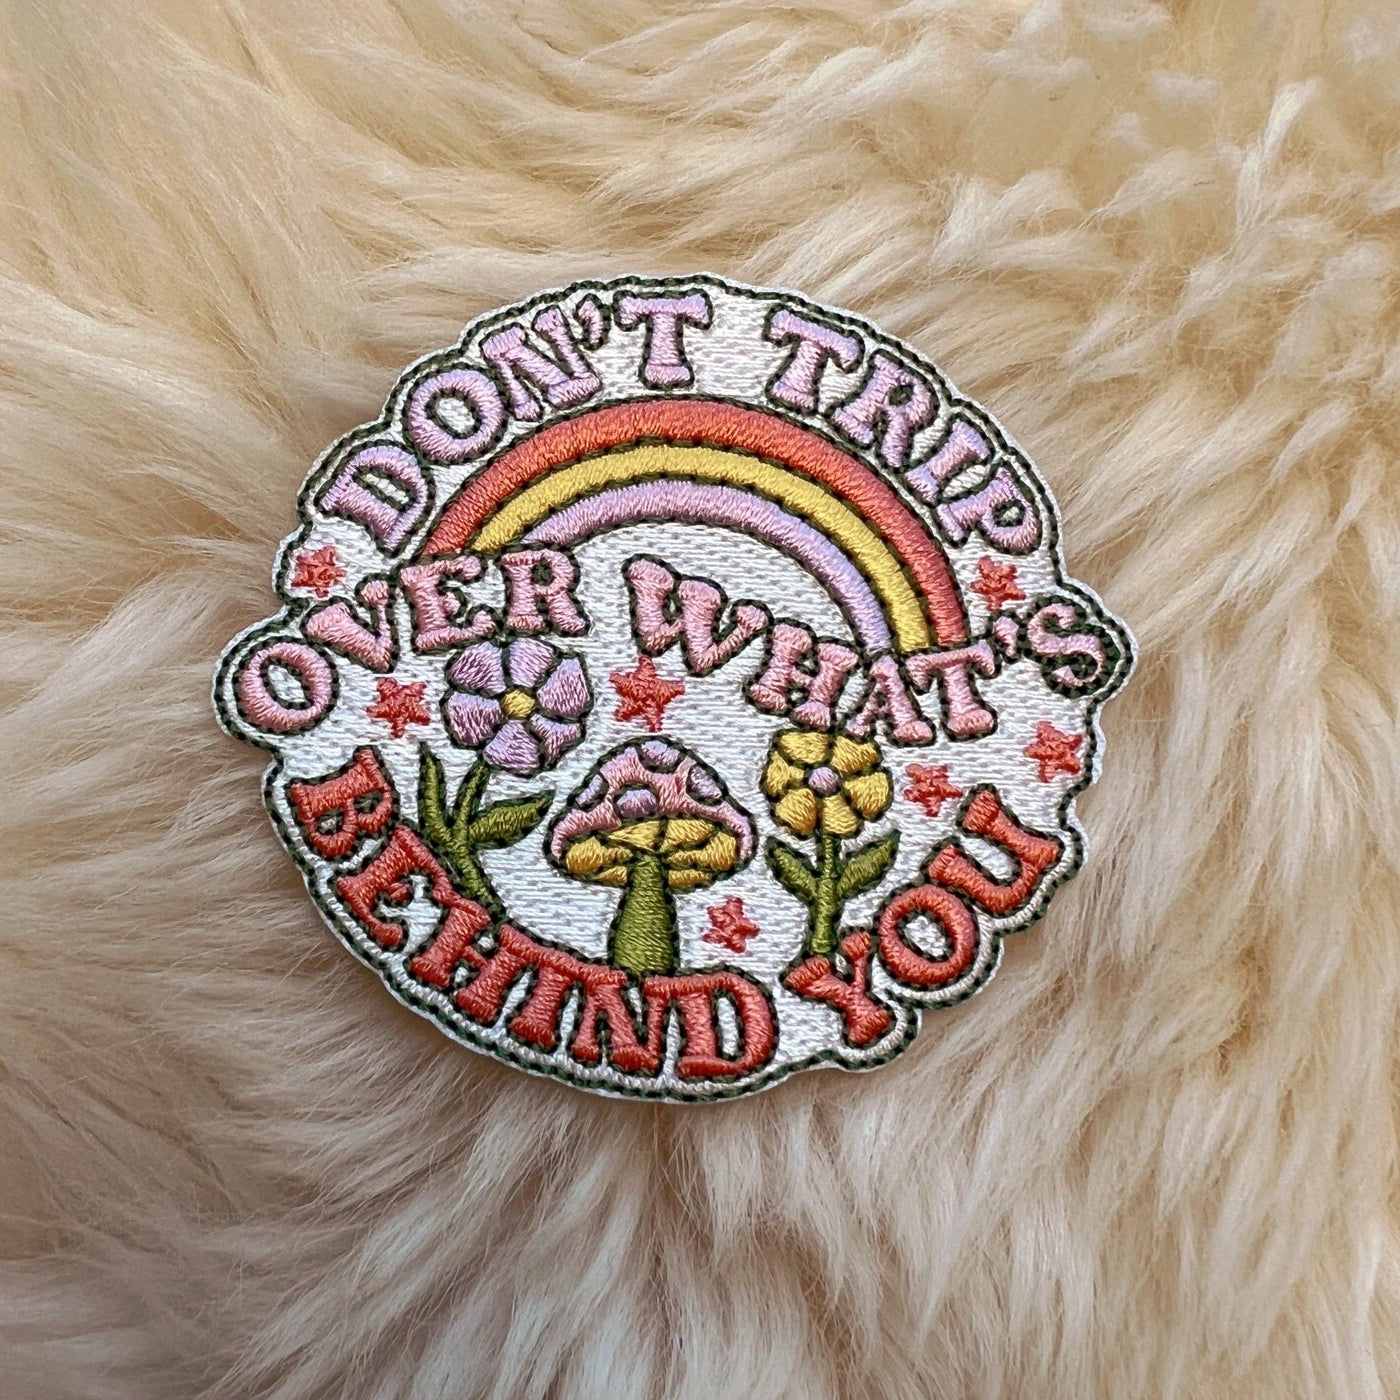 Don't Trip Over What's Behind You Patch